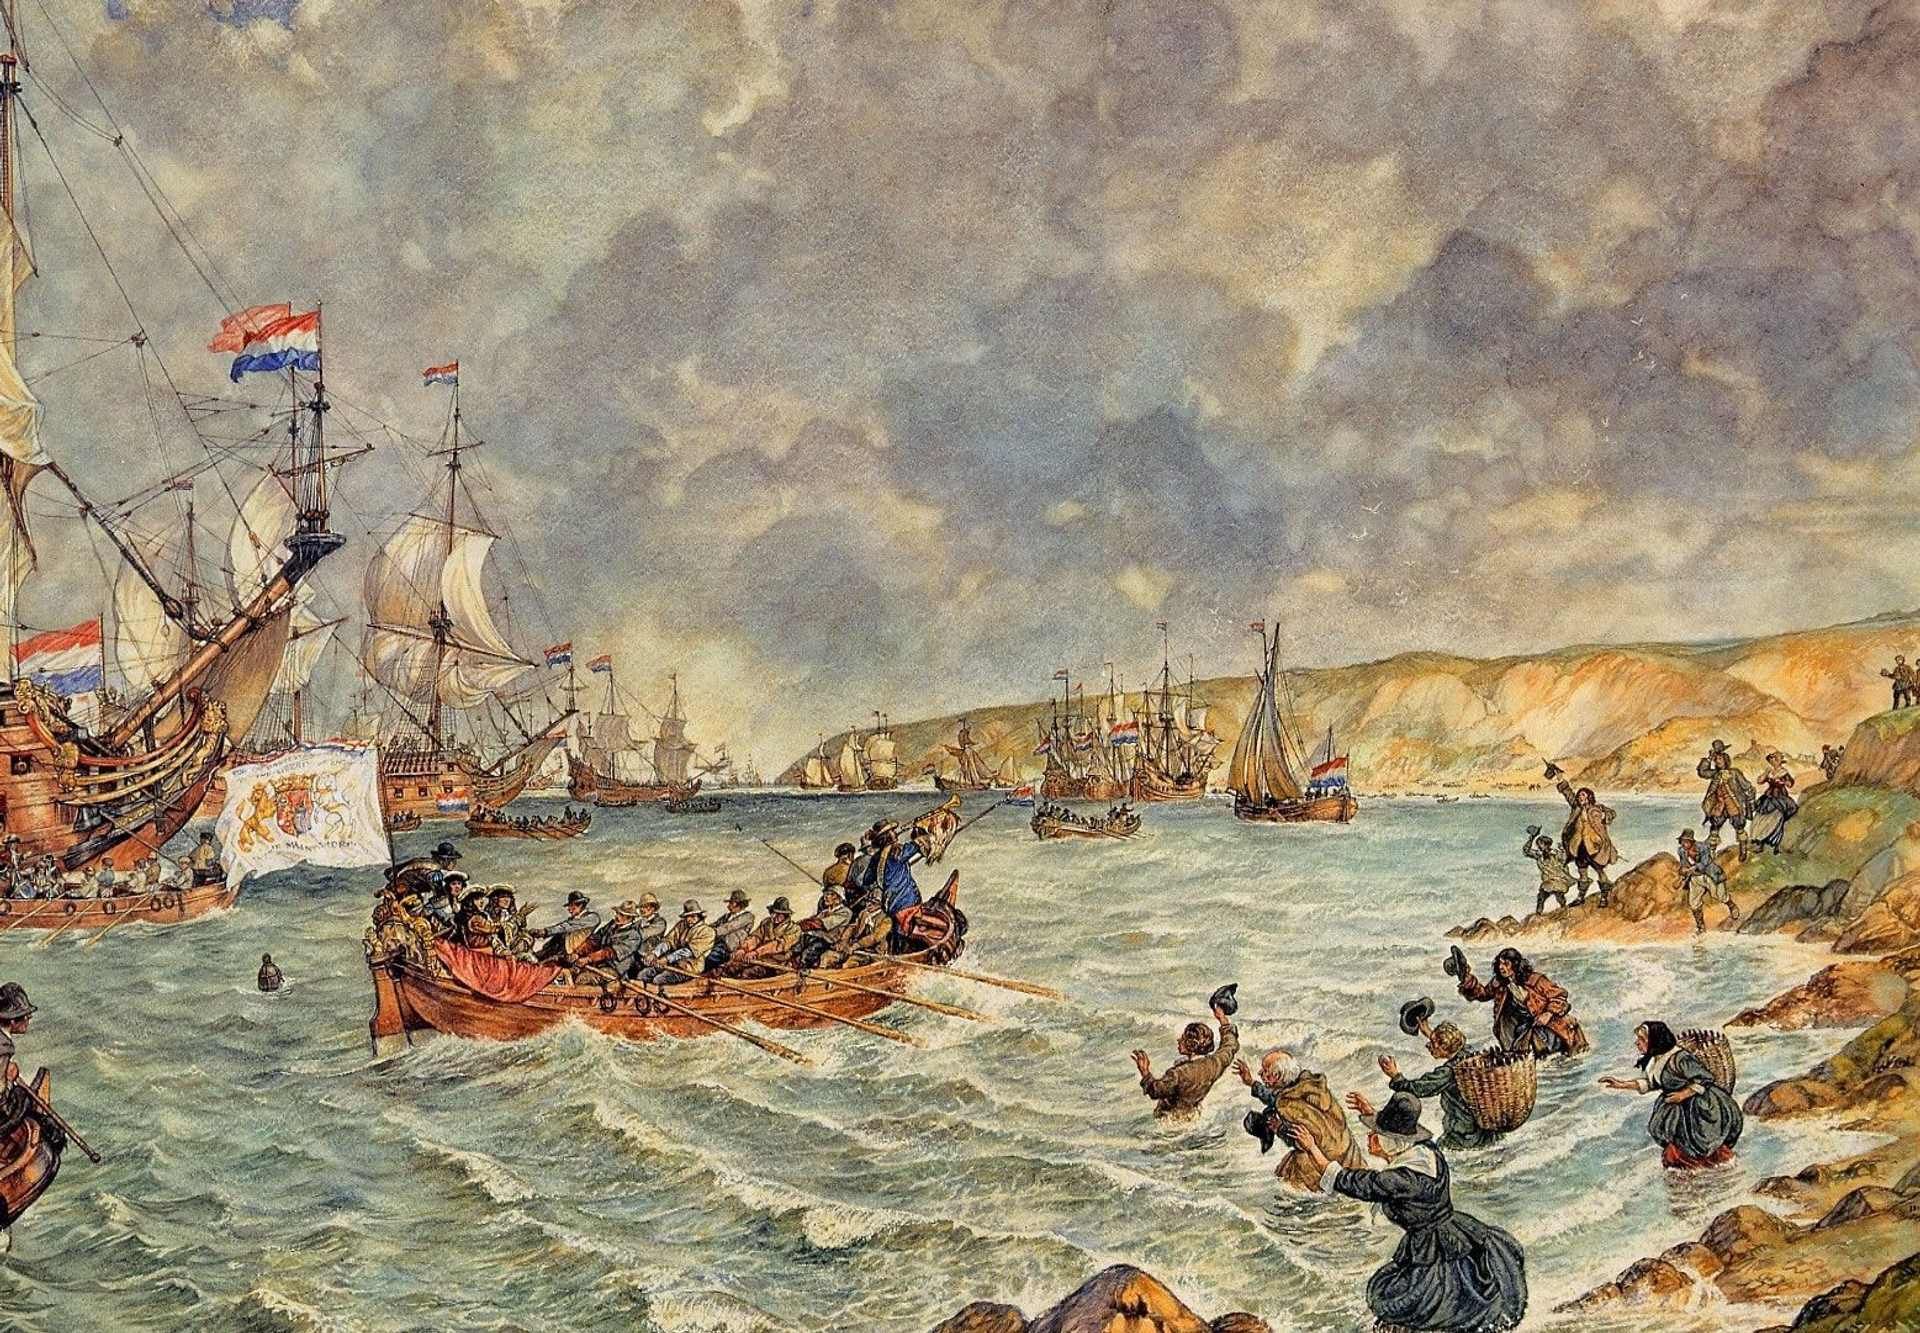 This is a vibrant historical painting depicting the landing of William of Orange in England. The scene is bustling with activity and set against a backdrop of a cloudy sky and distant cliffs. Multiple sailing ships adorned with flags are anchored near the shore. In the foreground, a prominent boat filled with soldiers and a flag bearing a coat of arms approaches the beach. Other small boats are also making their way to land. Figures onshore, some on horseback, are actively welcoming the newcomers. The choppy waters of the sea and the dynamic poses of the people suggest the urgency and importance of the event. The artwork captures a significant moment with a sense of movement and anticipation.